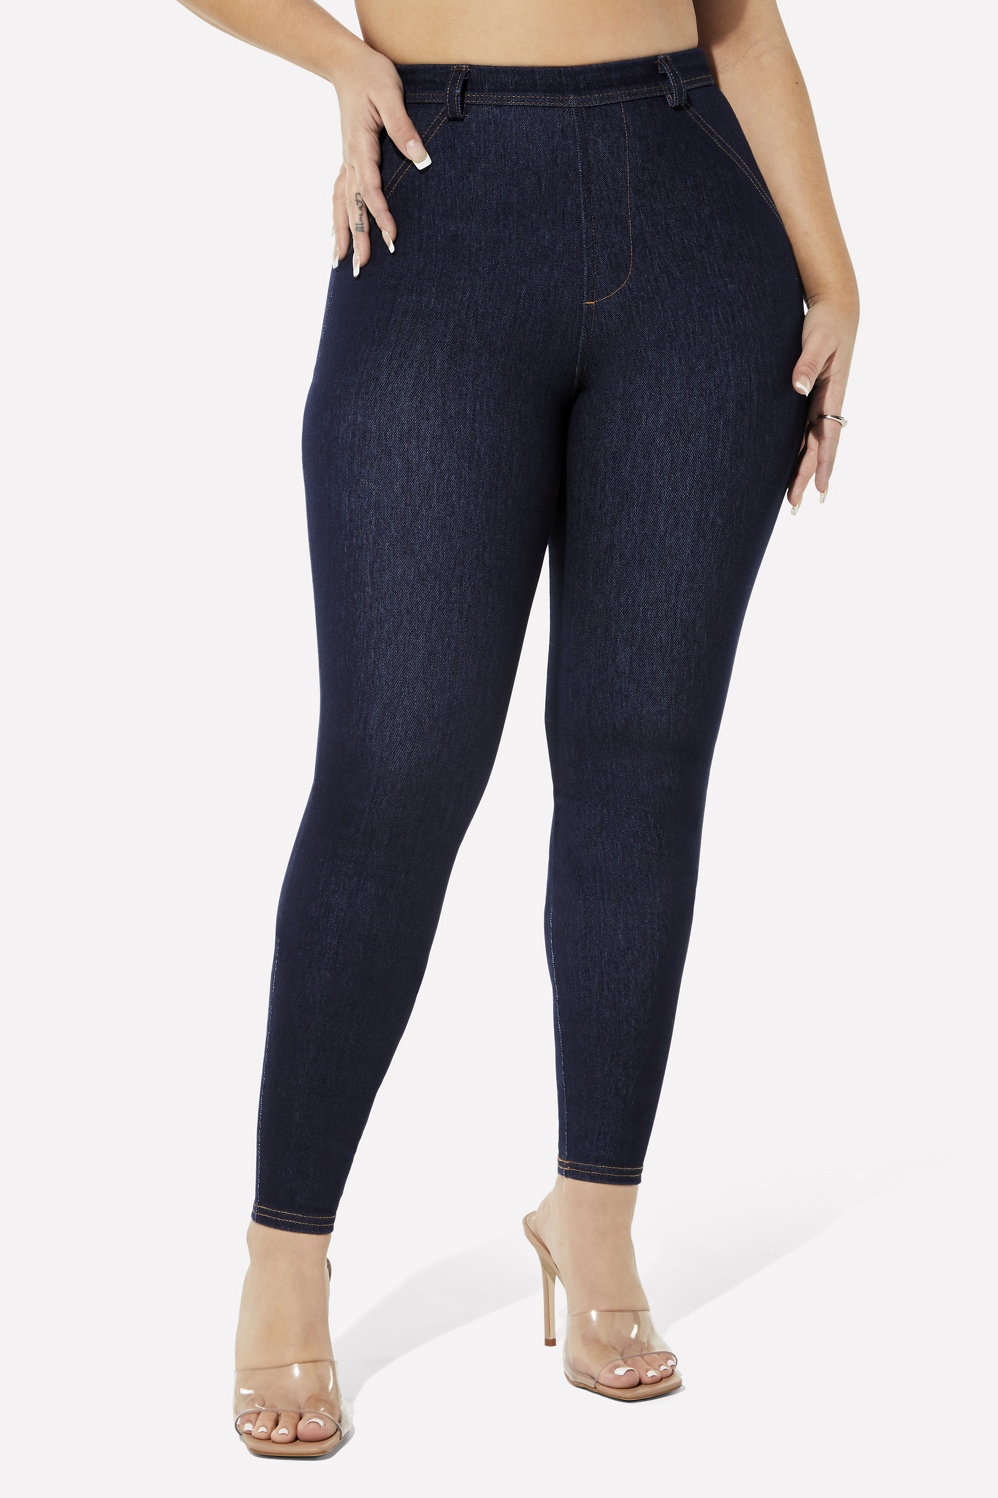 Yitty Stretch Denim Smoothing Jean Served - Is